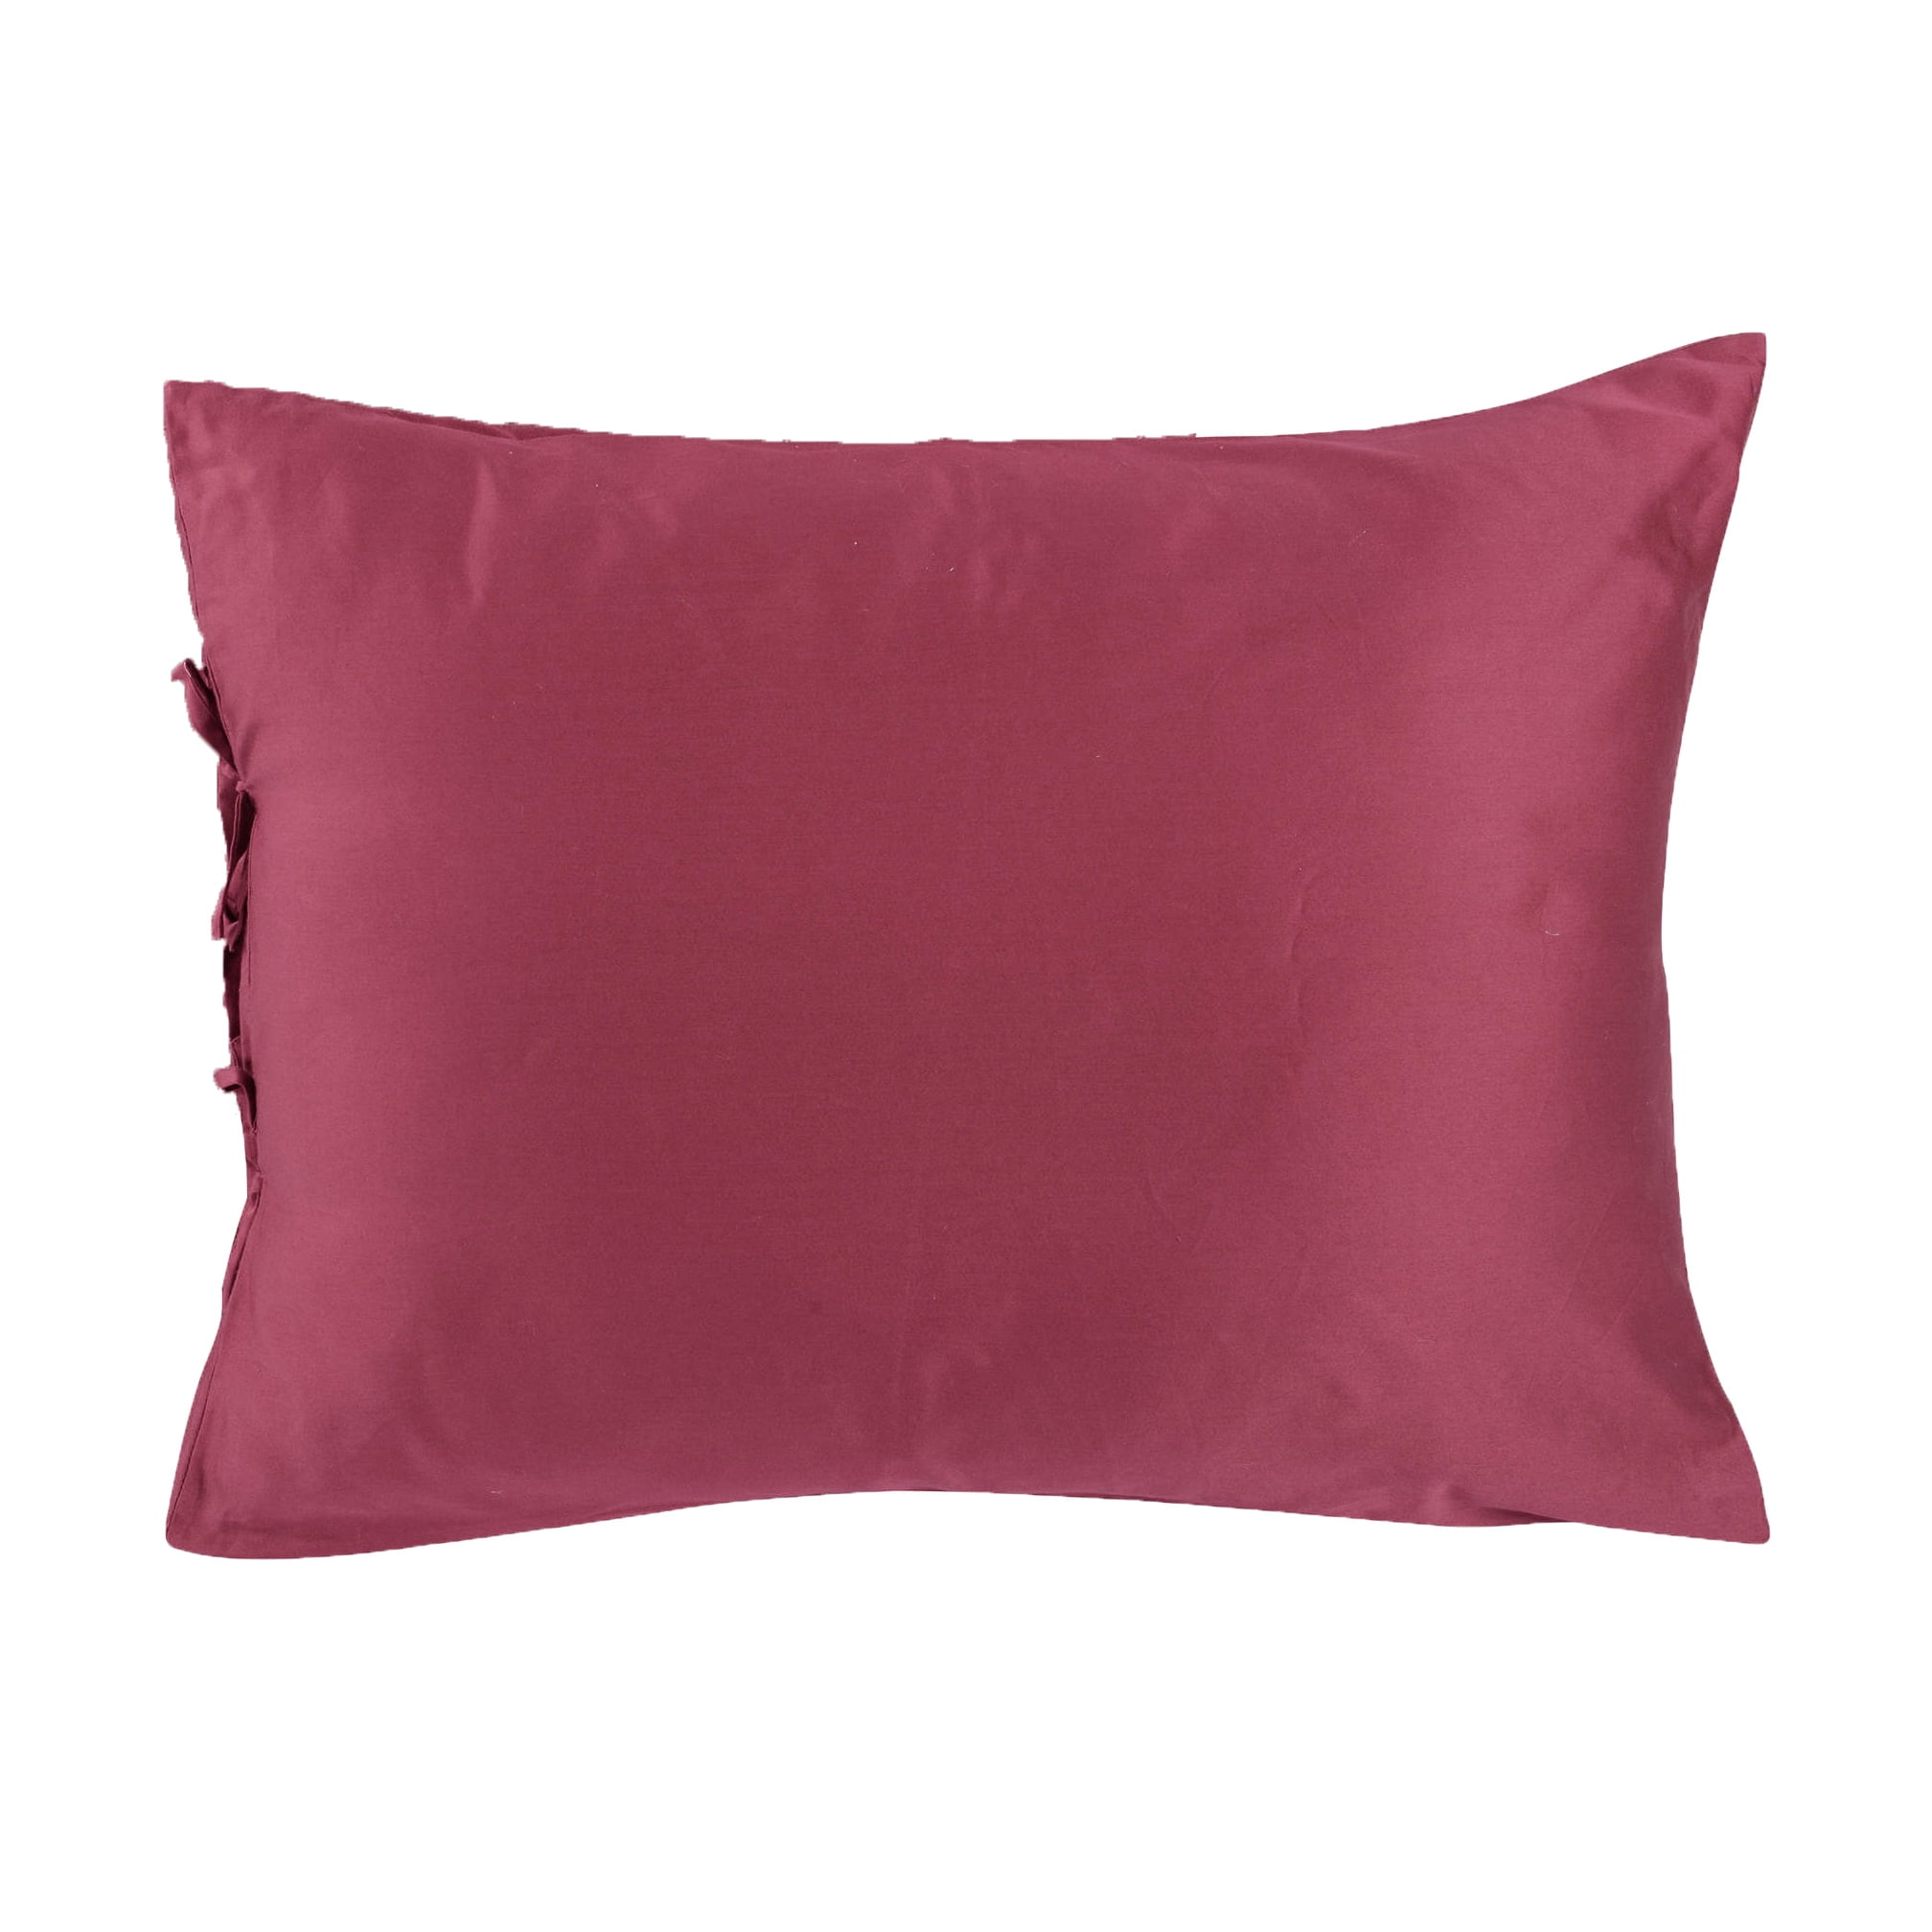 Set of Two Burgundy King Size Pillowcase Sham Covers 100% CottonSolid ...